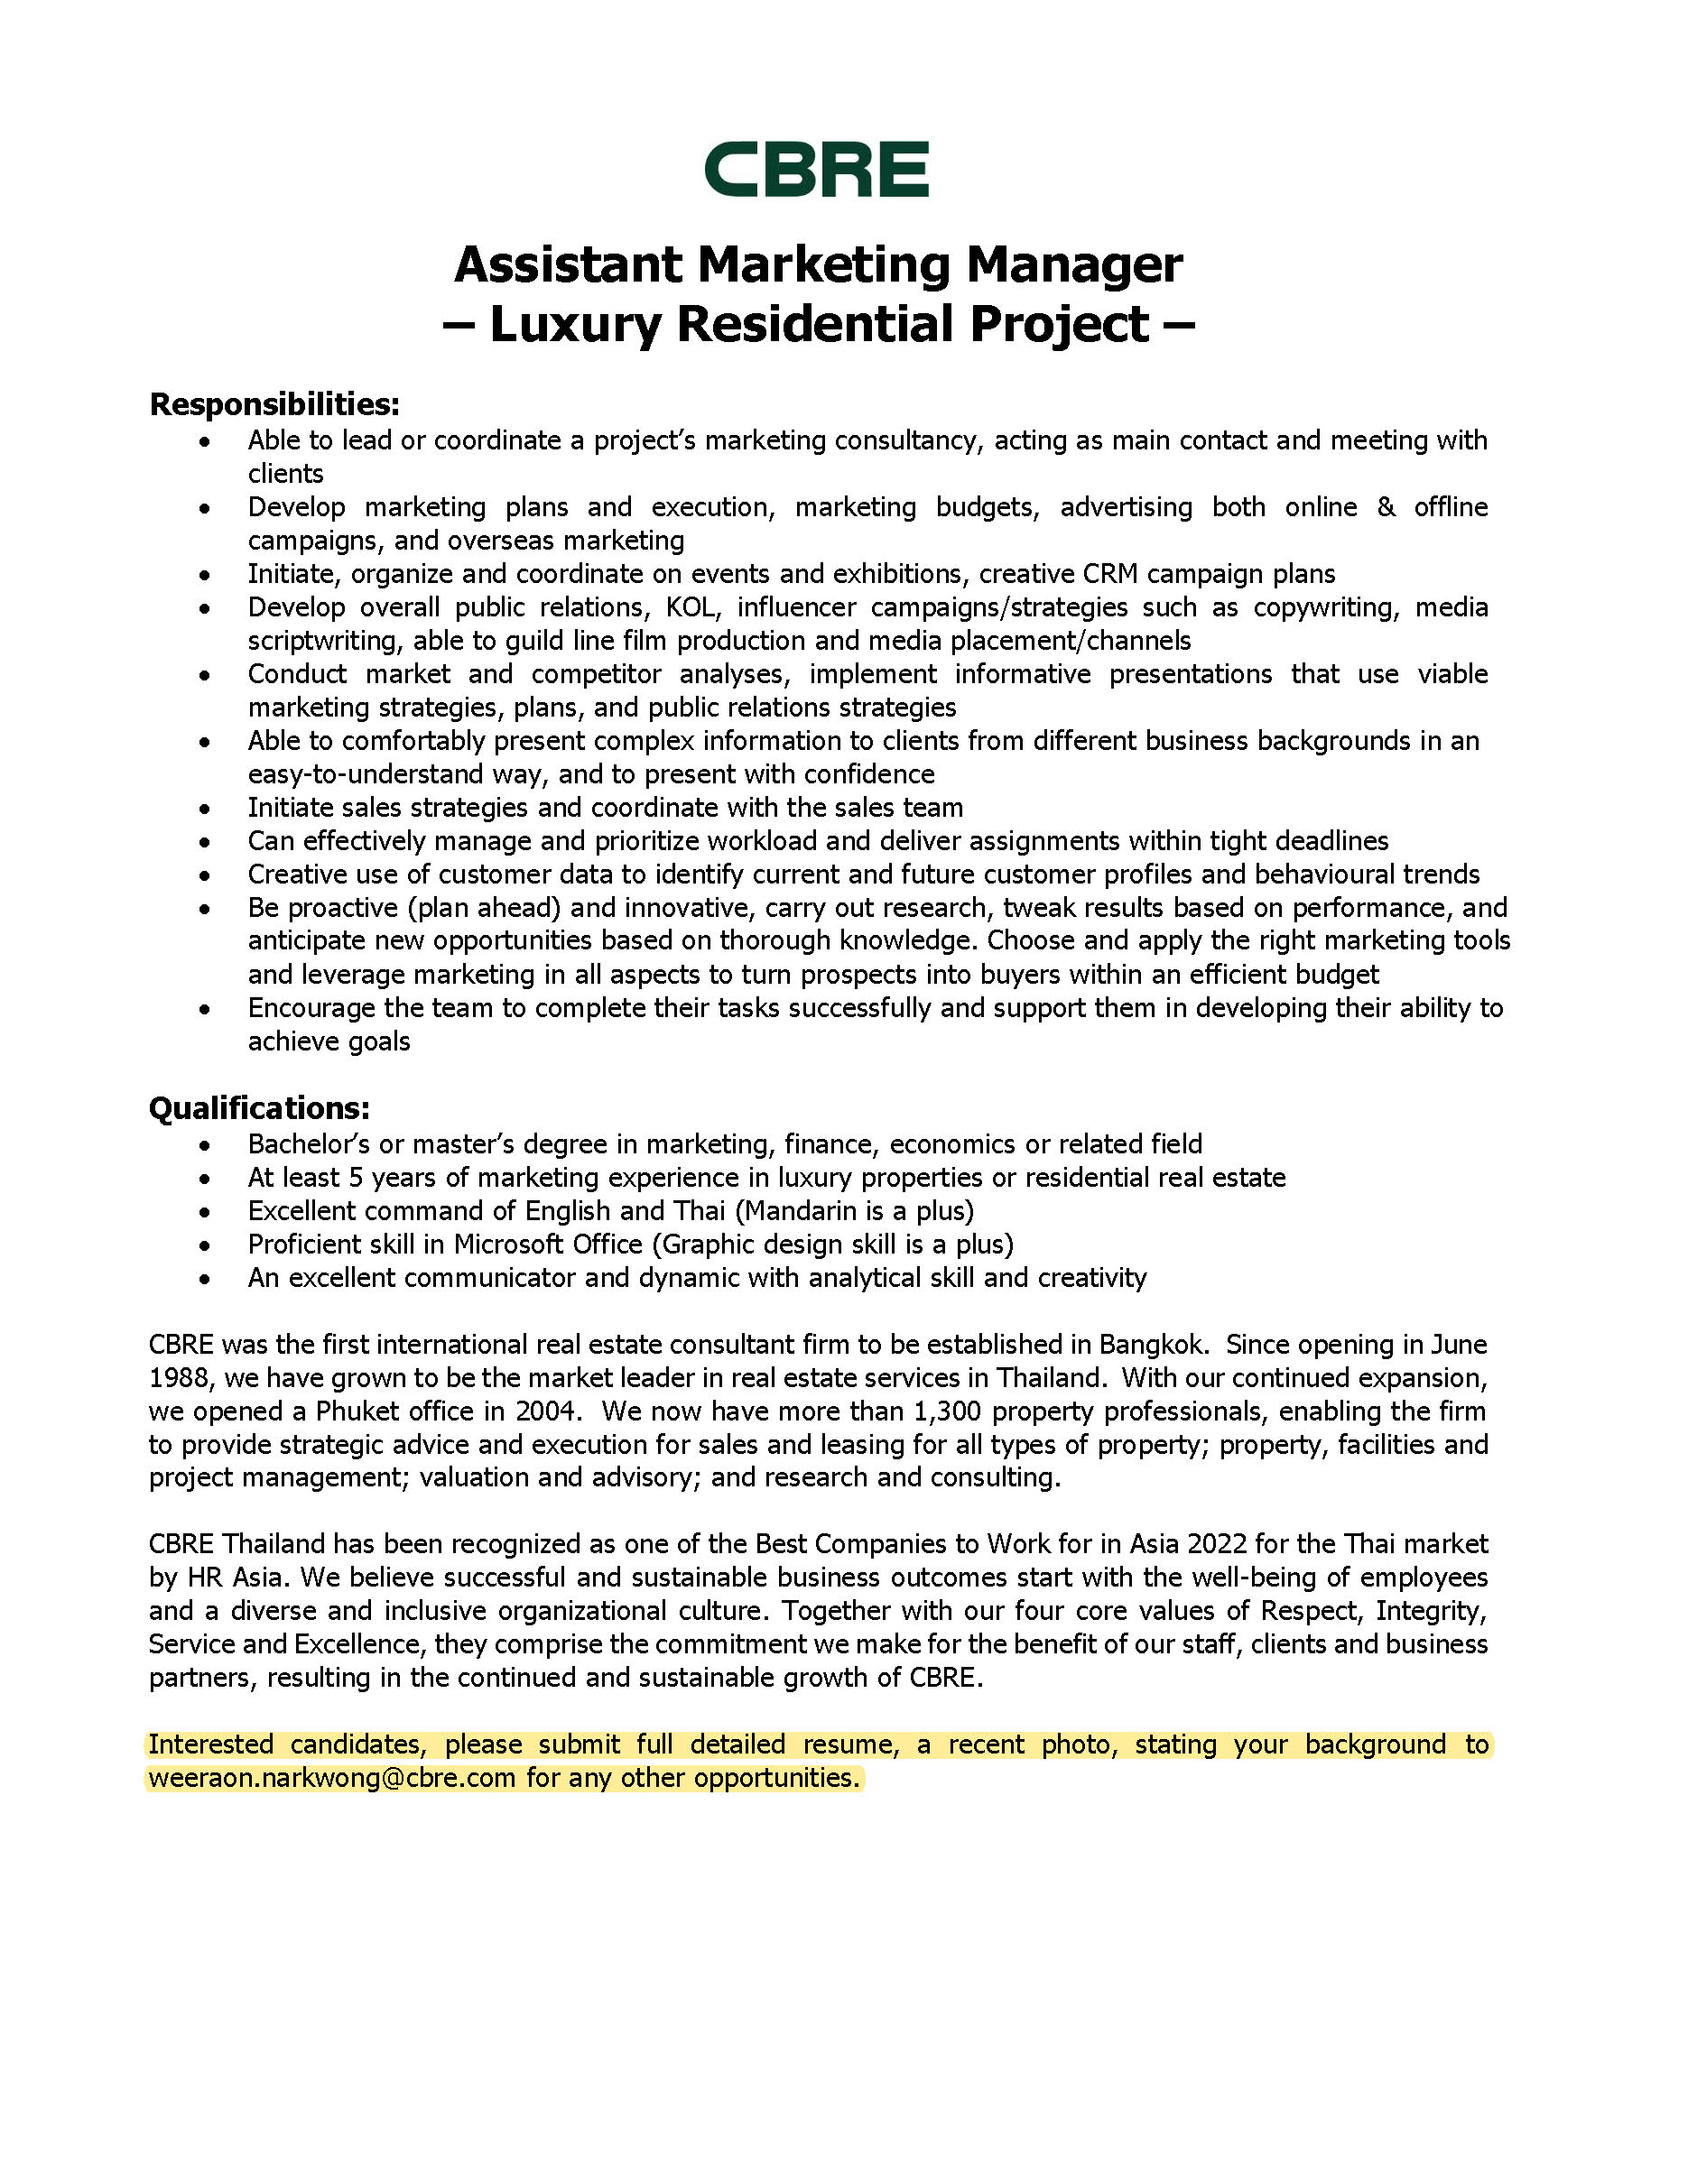 JD Assistant Marketing Manager Luxury Residential Project